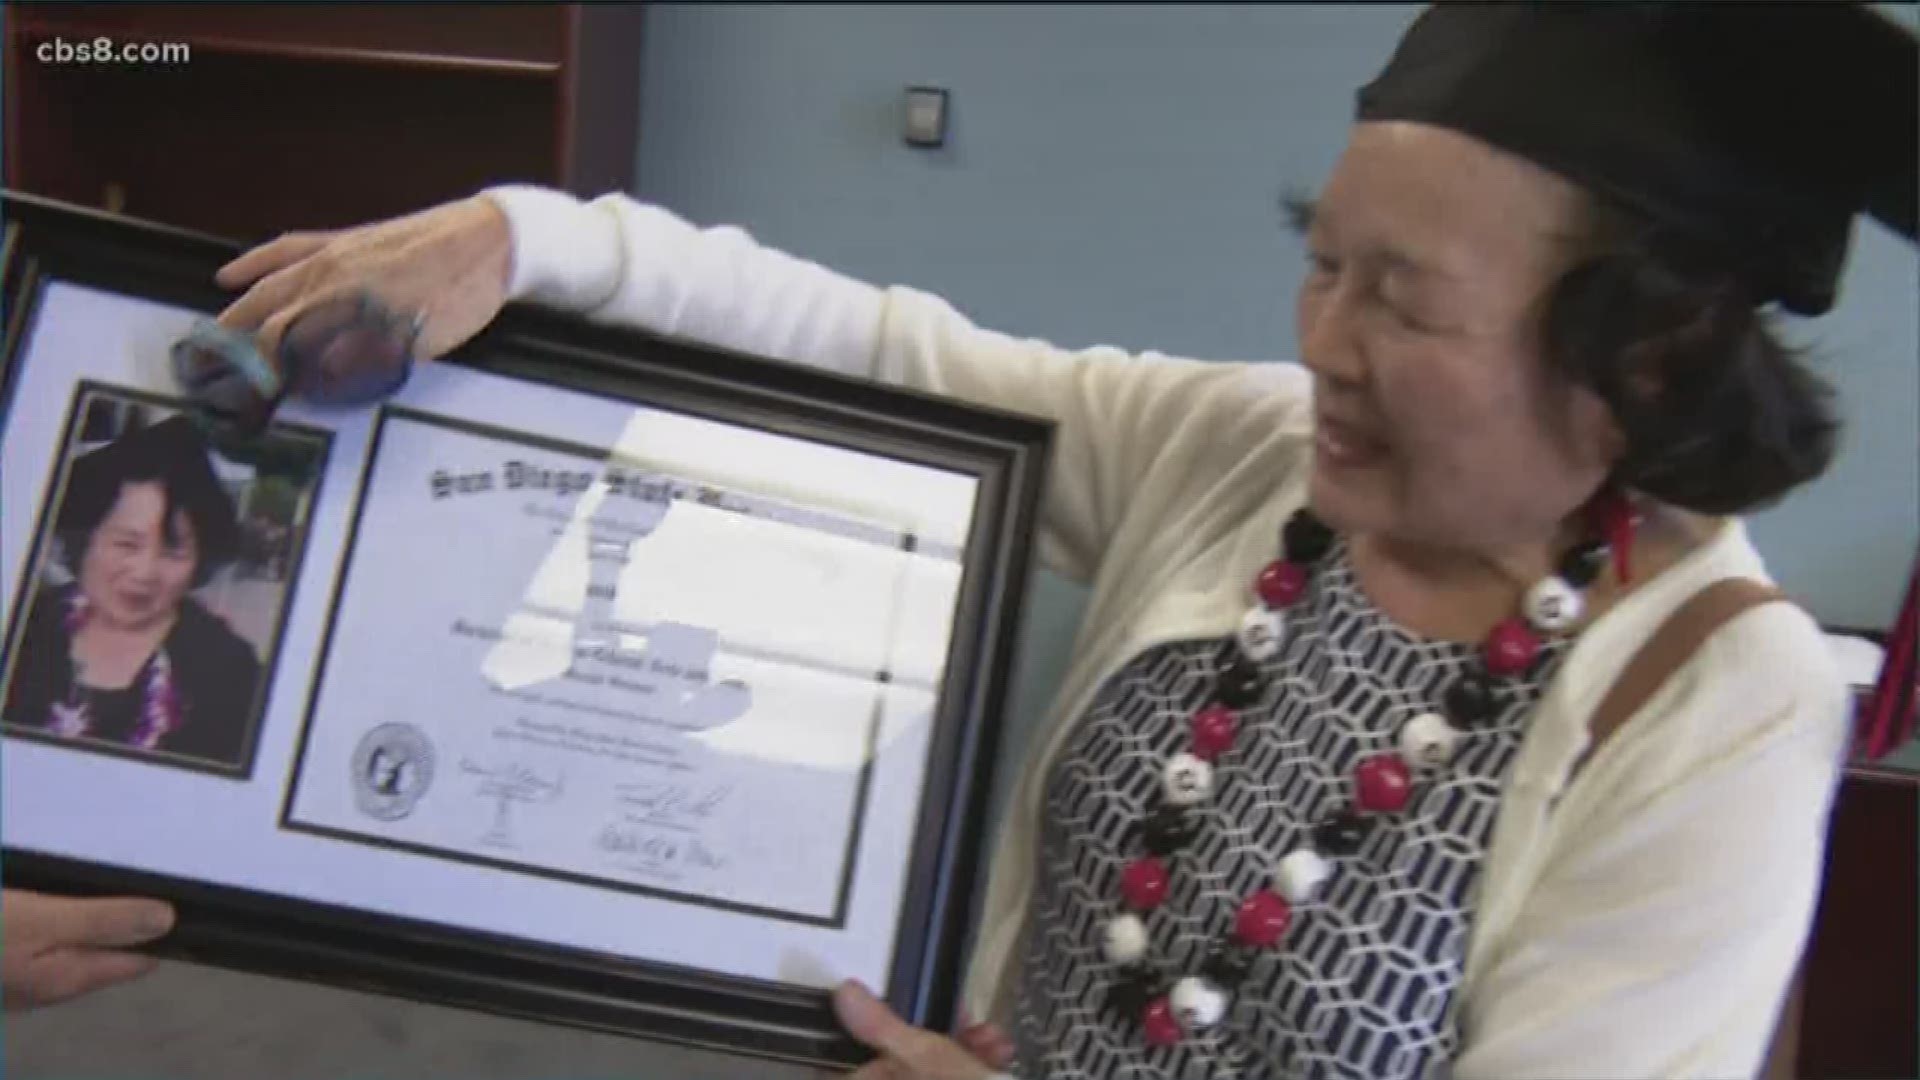 Yasuko Fuji isn't your traditional student. Dawning her cap and gown, Fuji at 80 years young is ready for the big day.